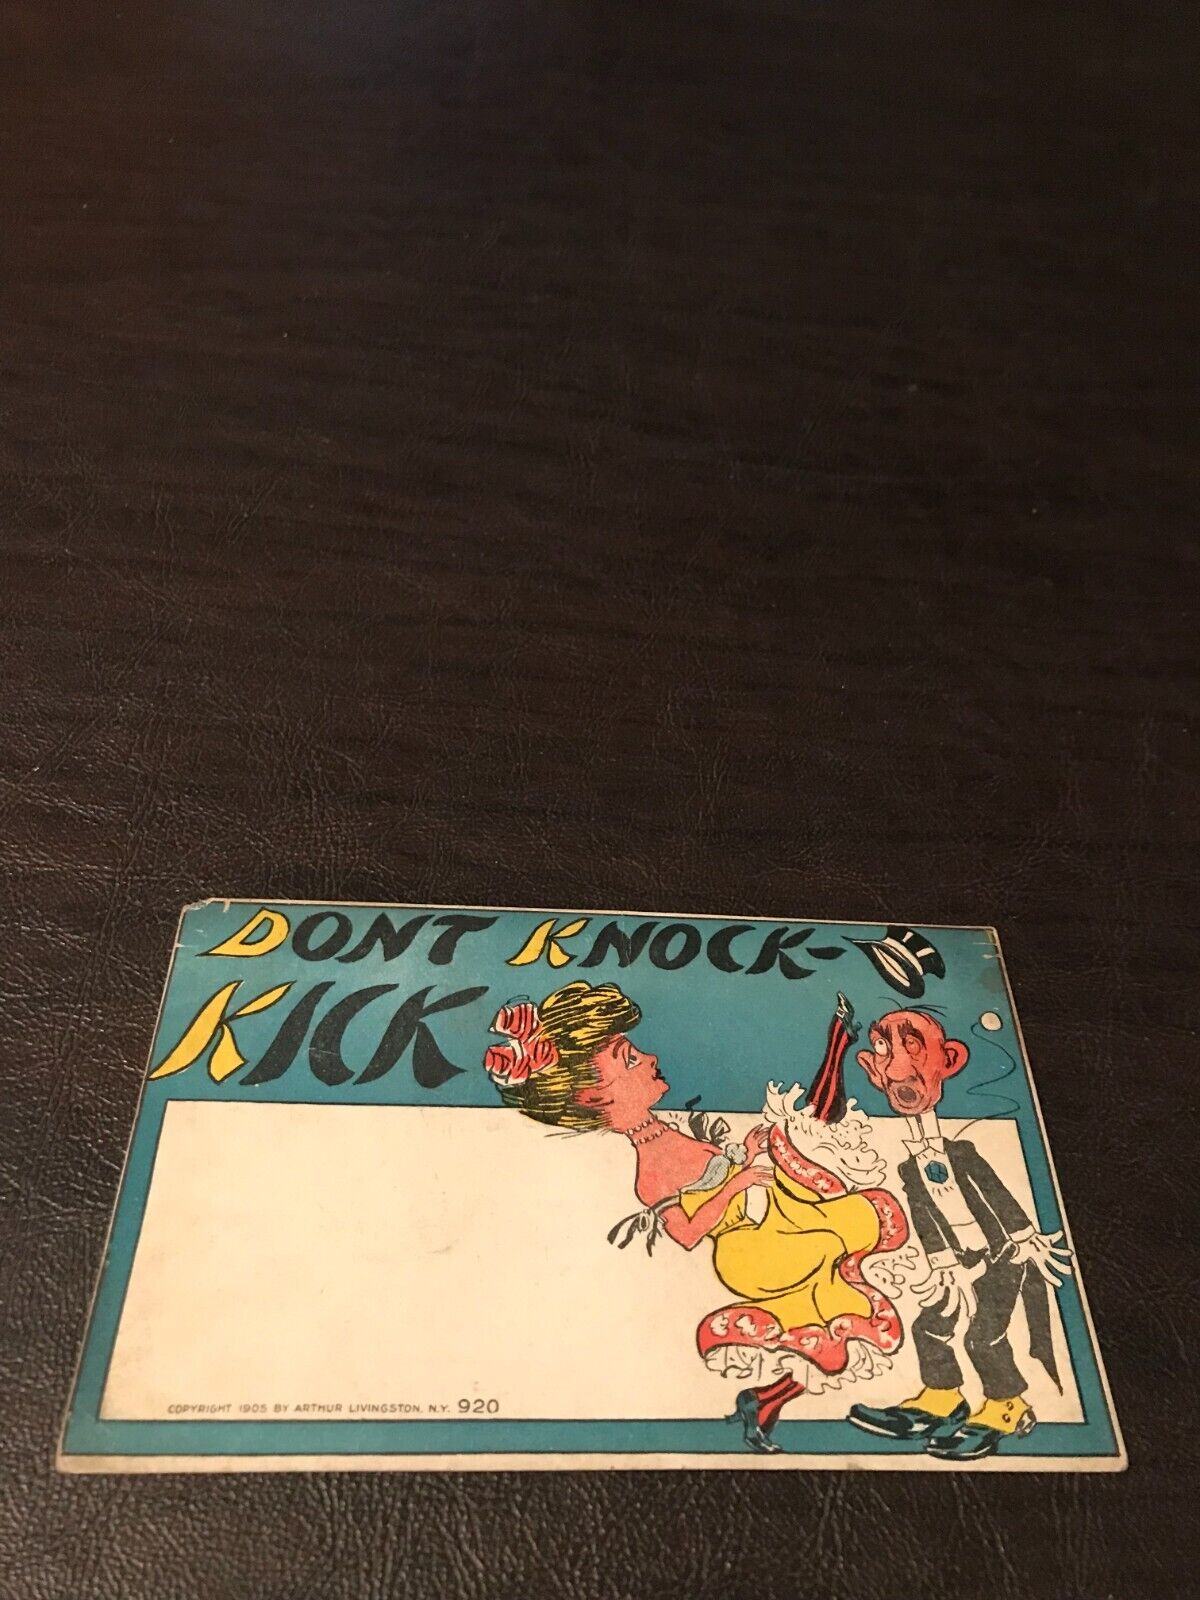 EARLY HUMOR UNPOSTED POSTCARD - DONT KNOCK - KICK